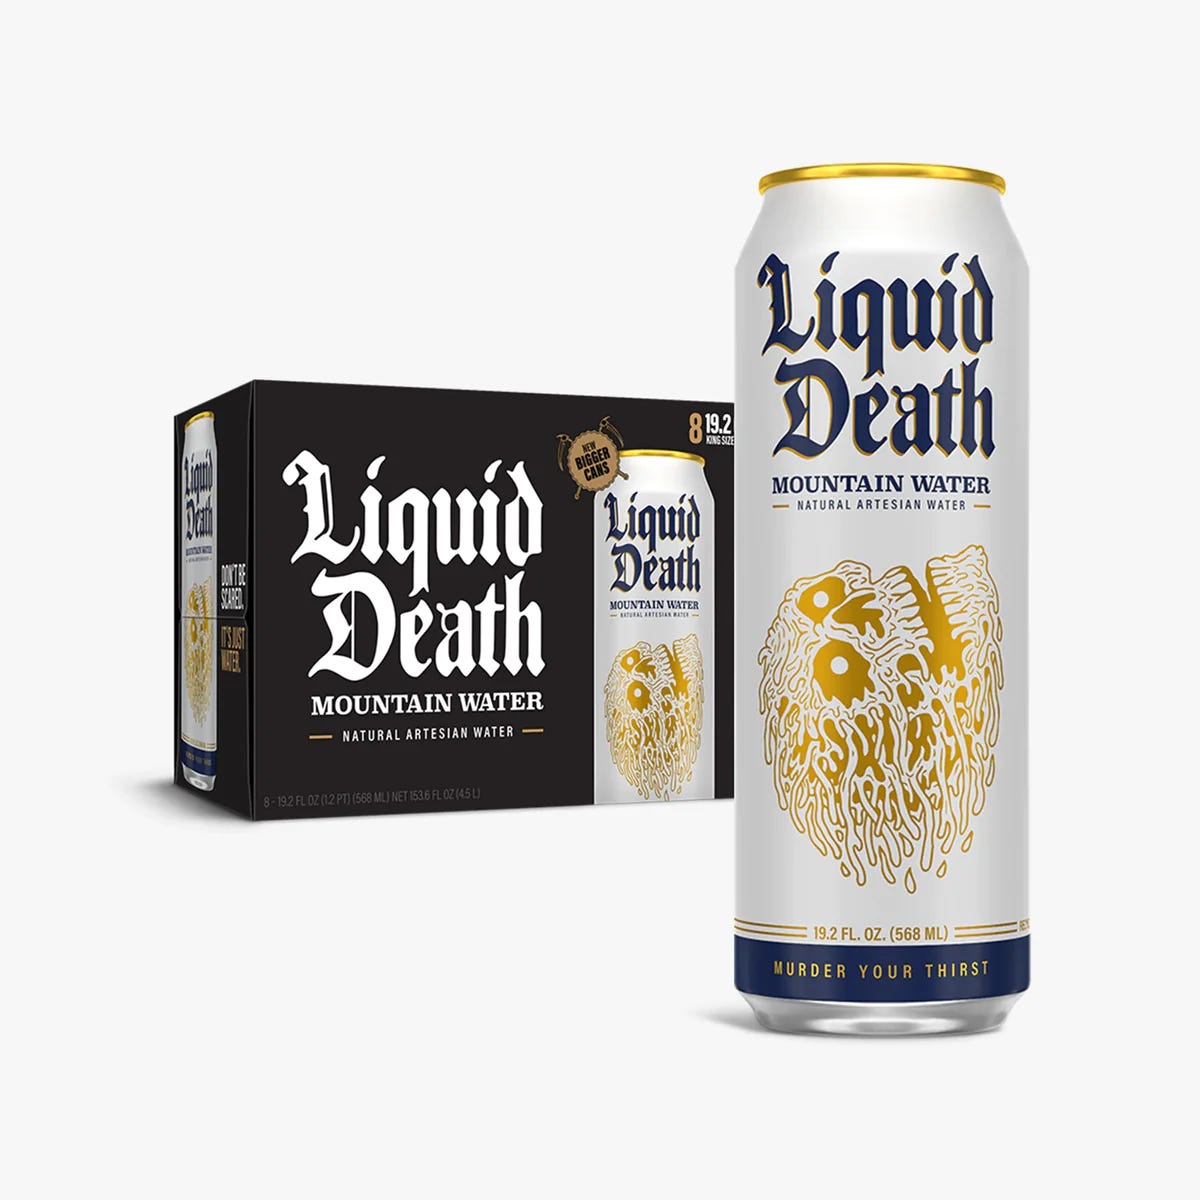 Extremely aggro cans of liquid death water.